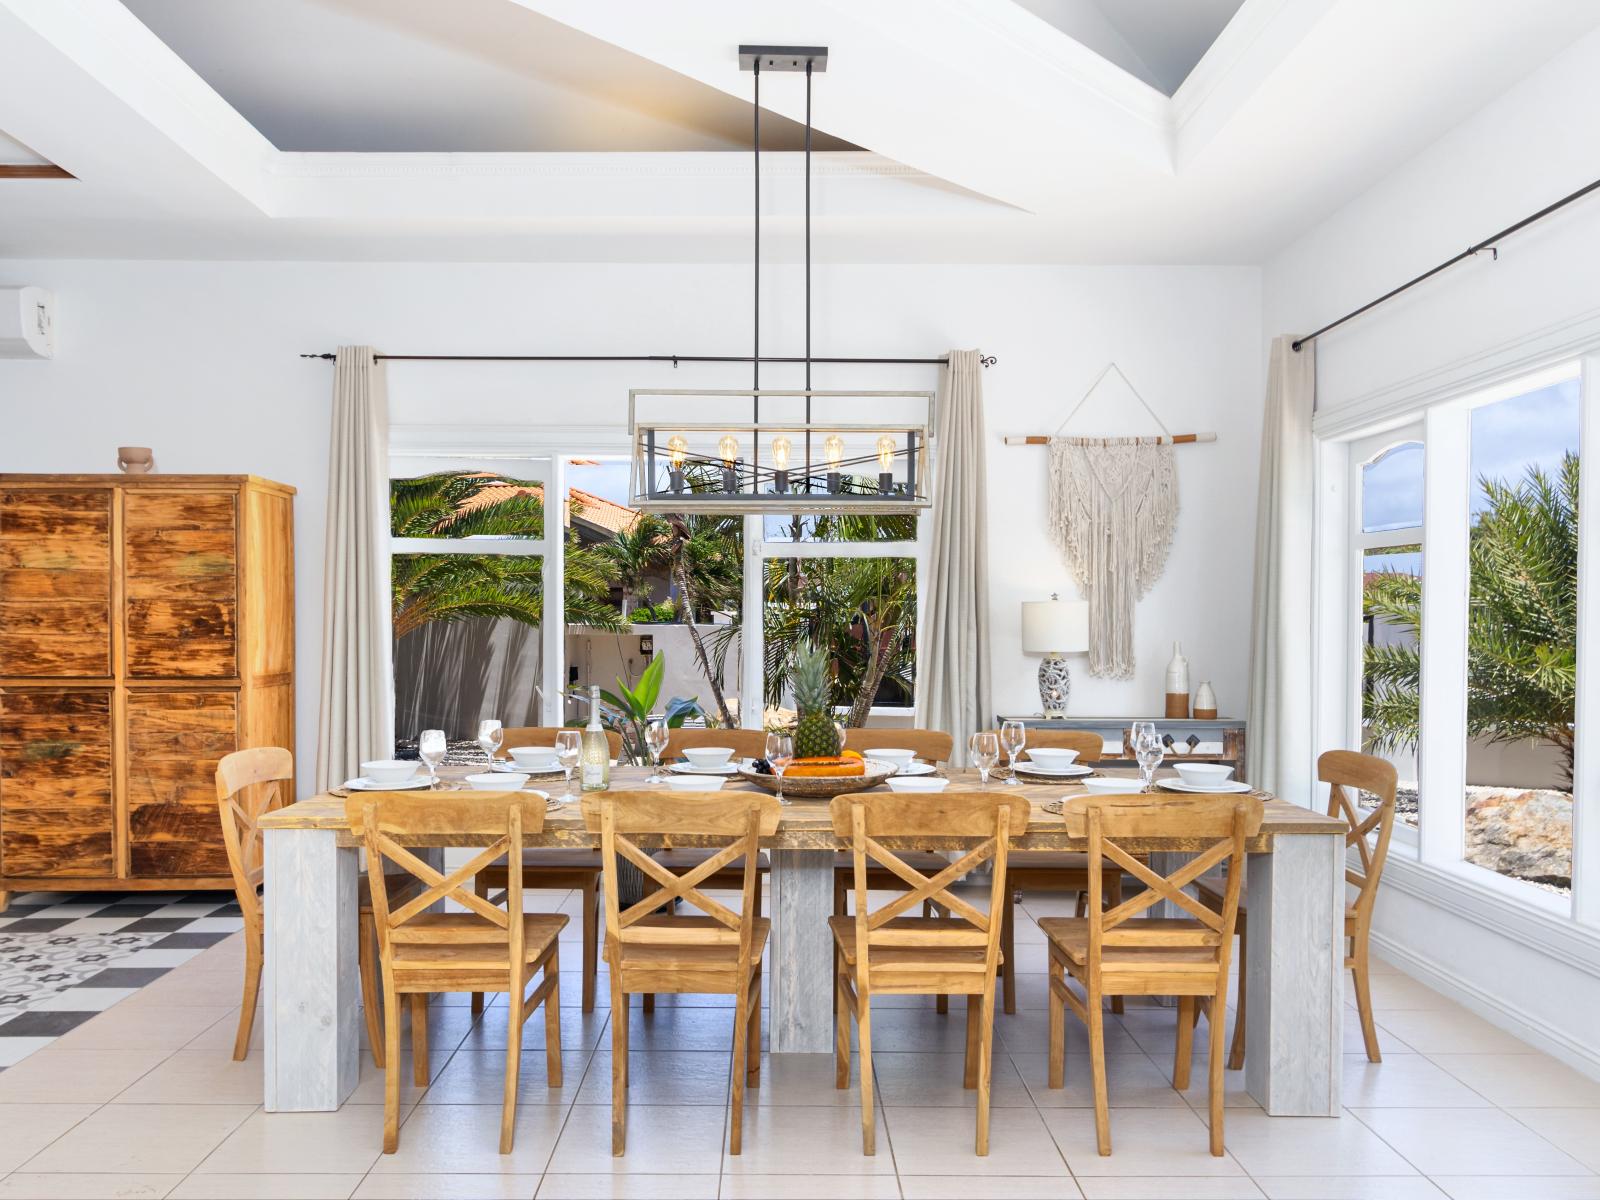 Chic Dining Area of the Apartment in Noord Aruba - Access to the backyard  - 10 Persons Dining - Thoughtful lighting fixtures creating an intimate and inviting atmosphere